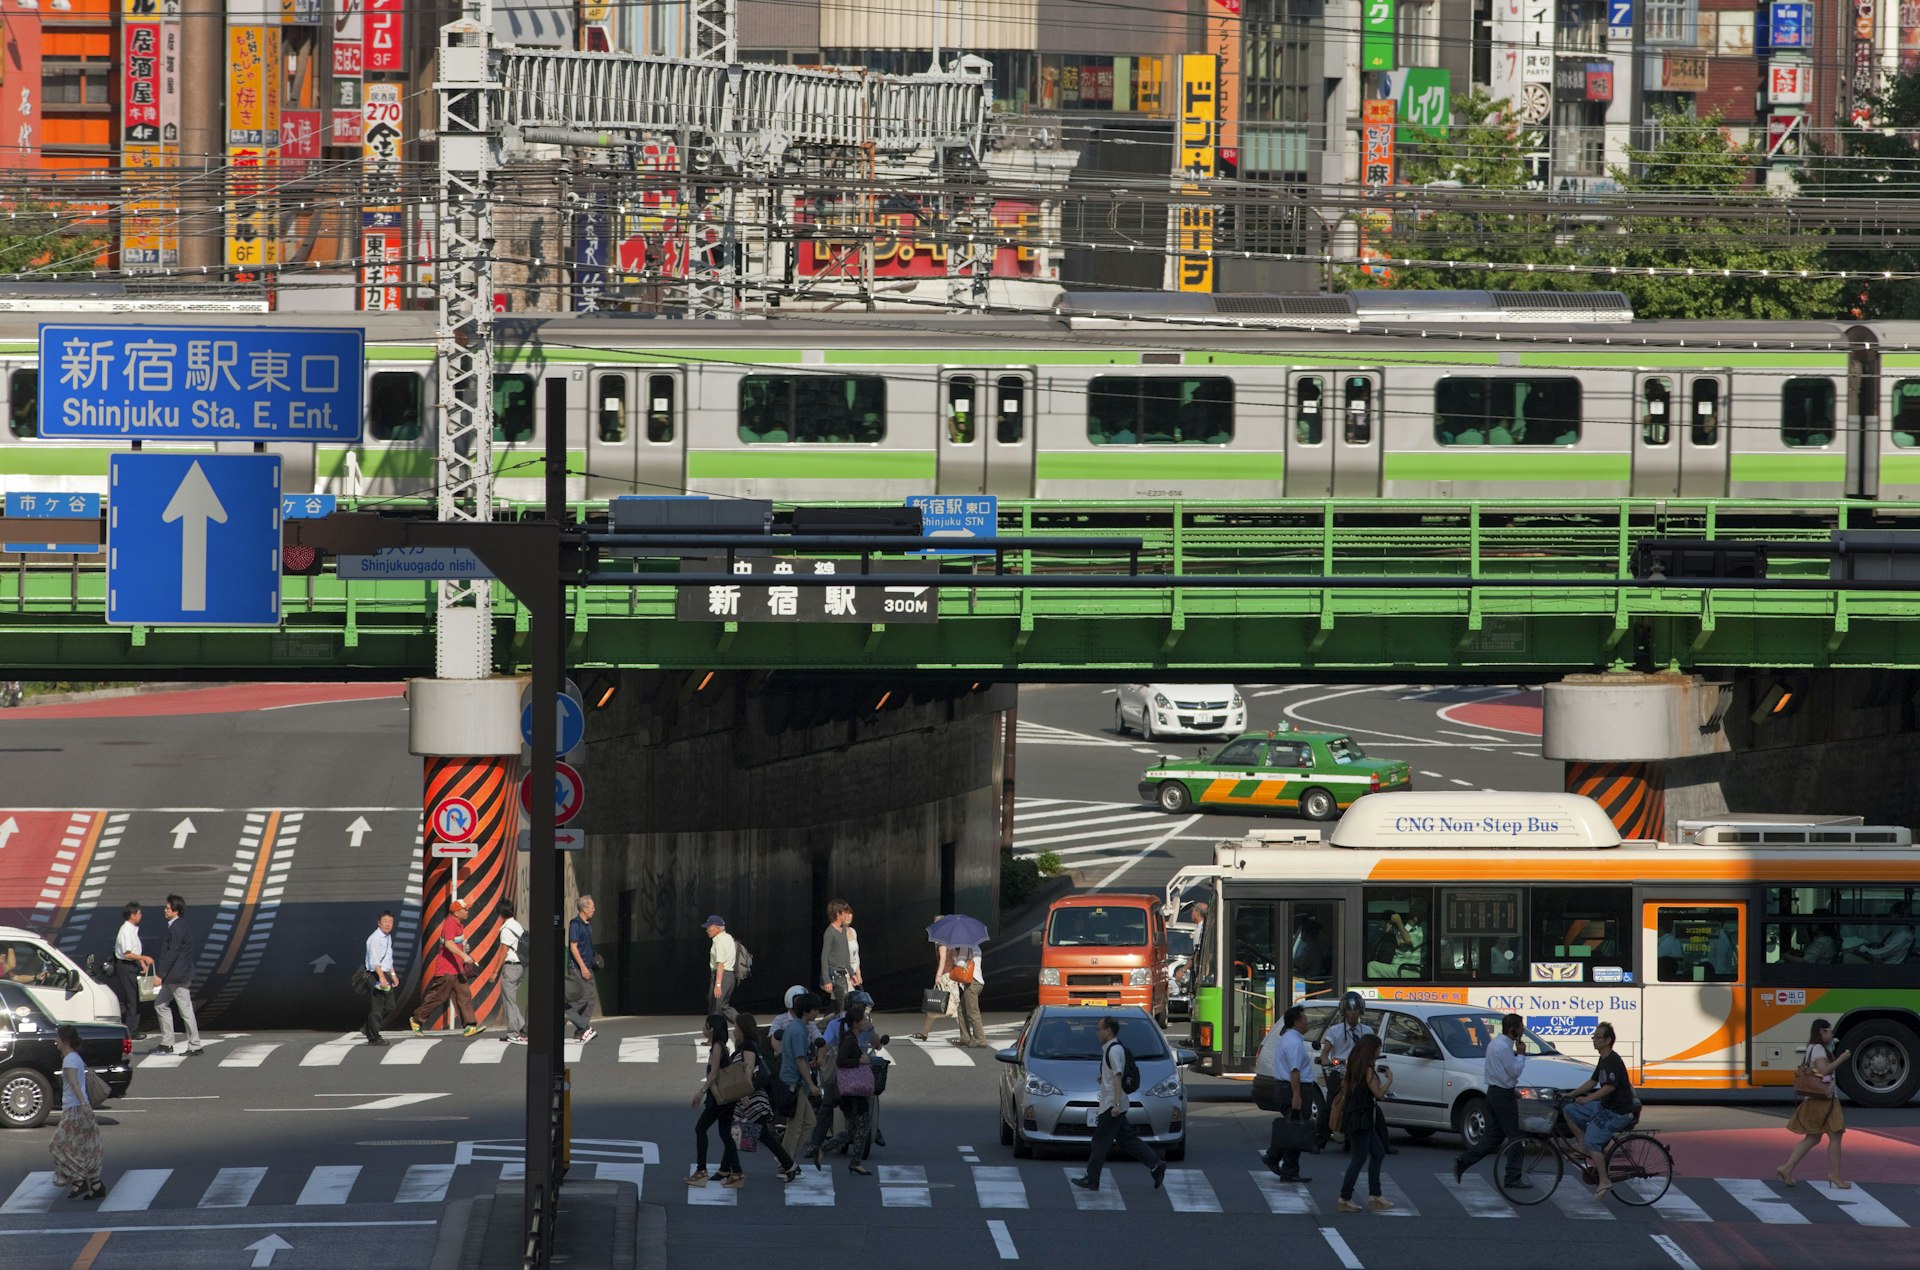 A train travels over a bridge above roads with pedestrians, cars and a bus below